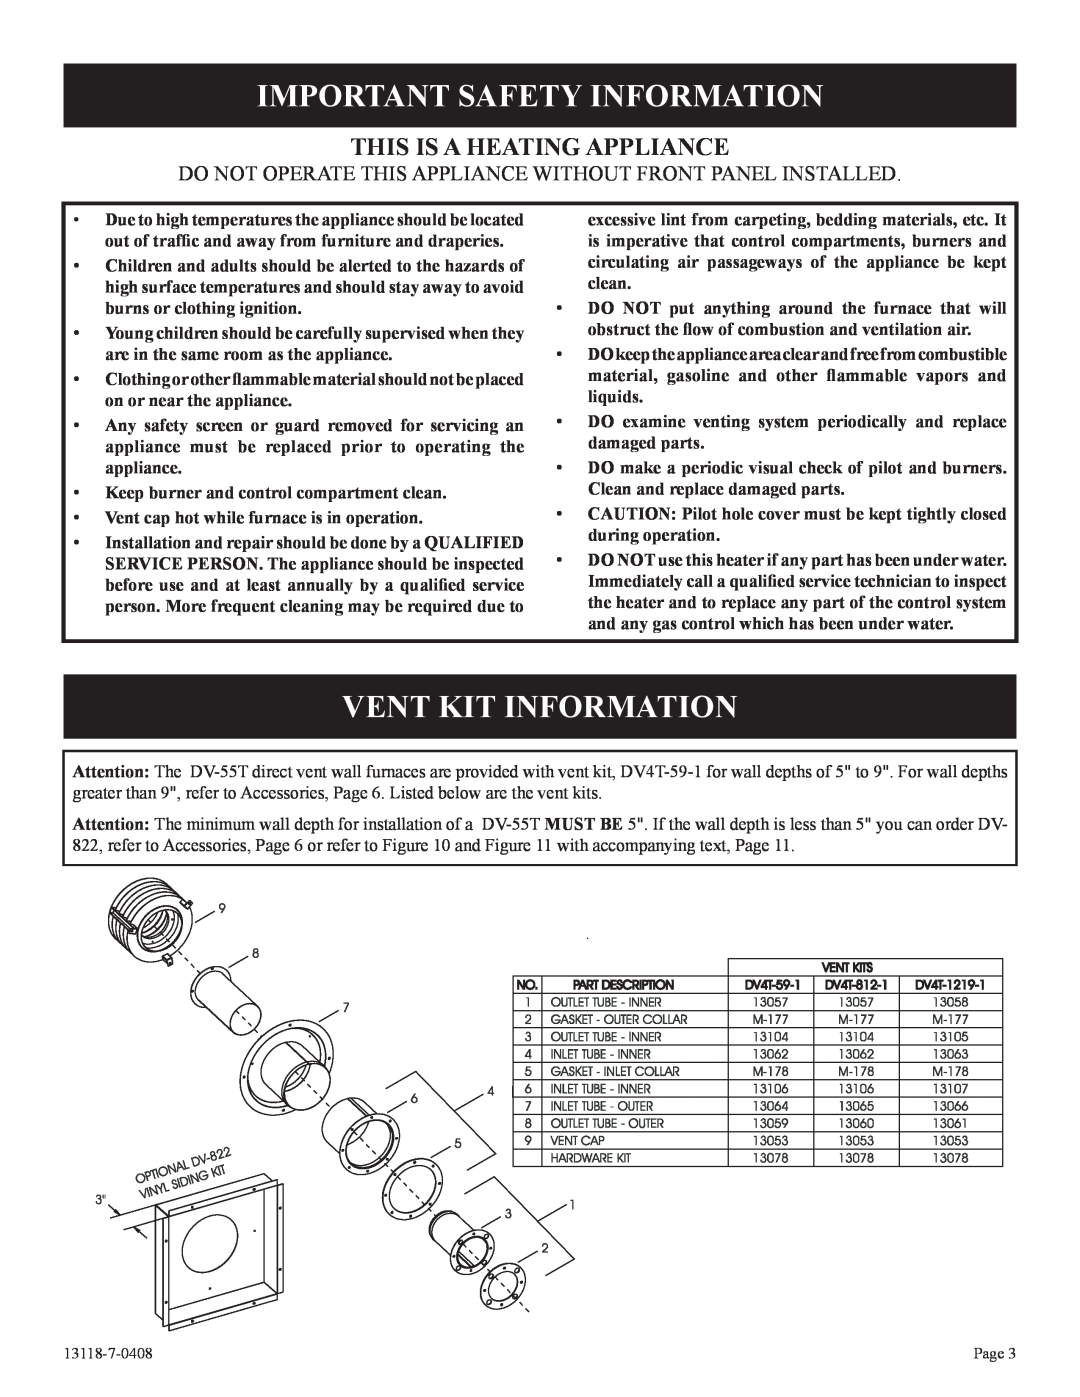 Empire Comfort Systems DV-55T-1 Important Safety Information, Vent Kit Information, This Is A Heating Appliance 